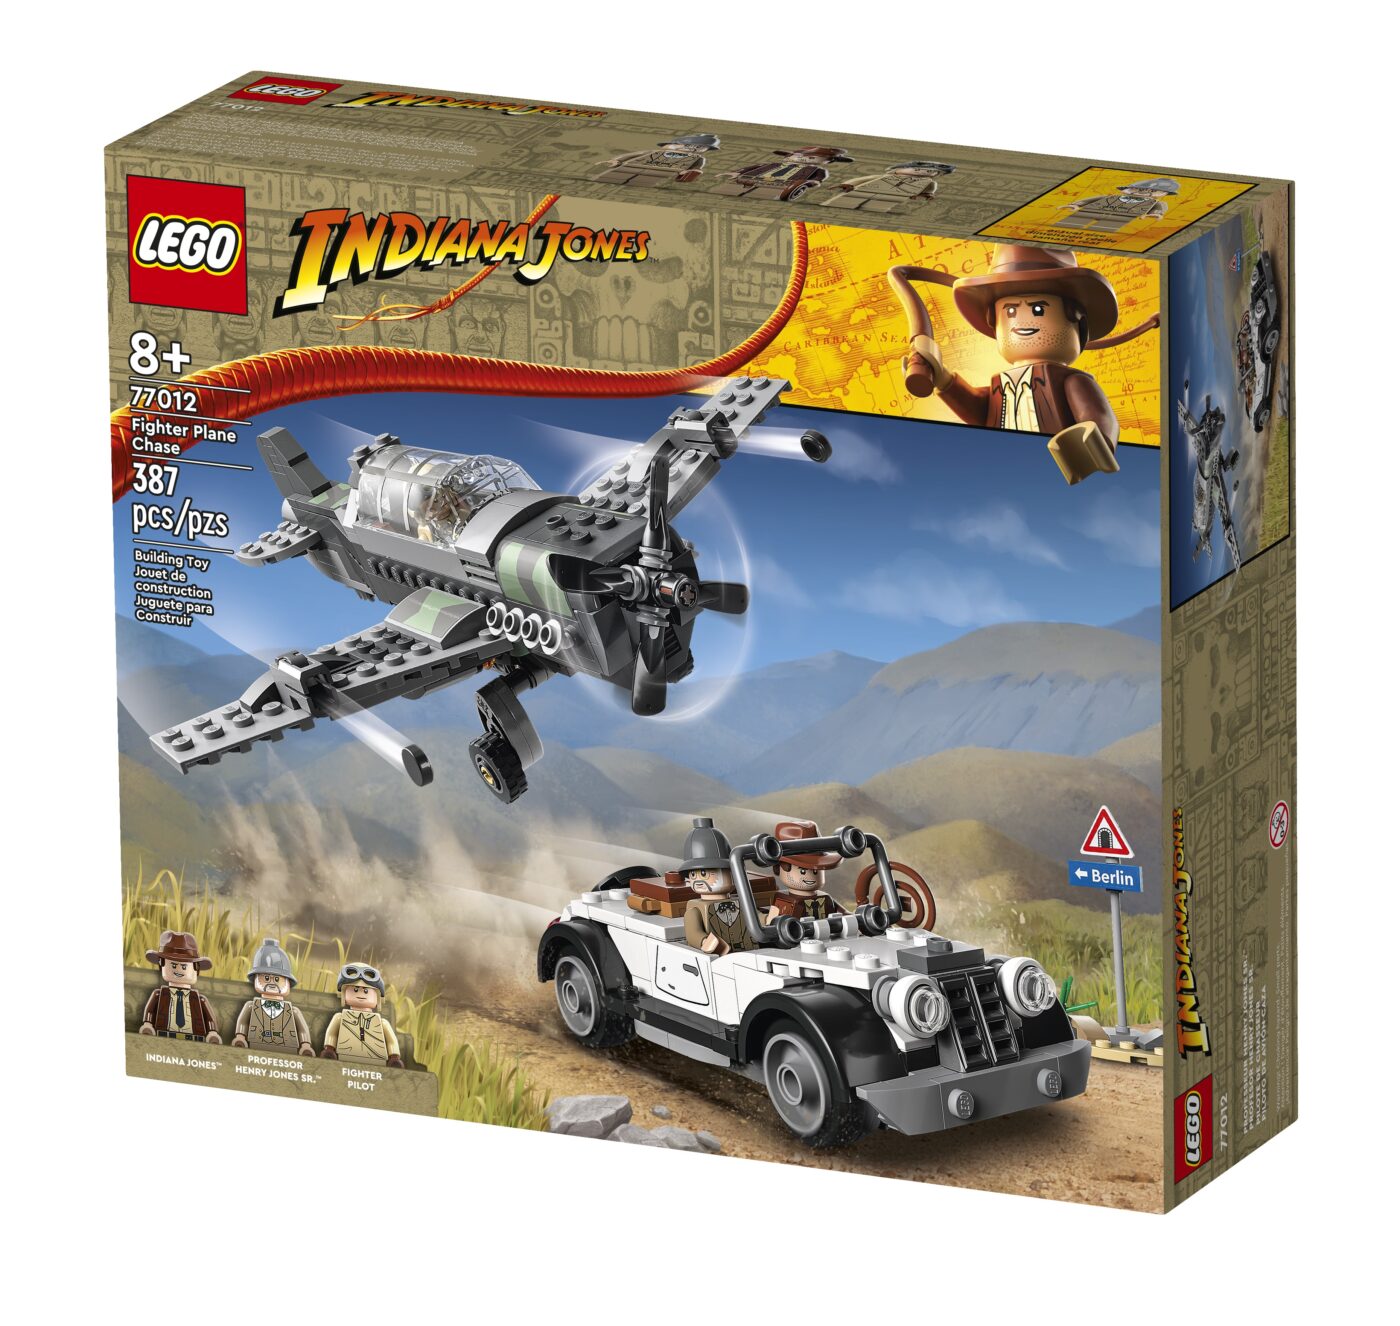 77012 Fighter Plane Chase Box